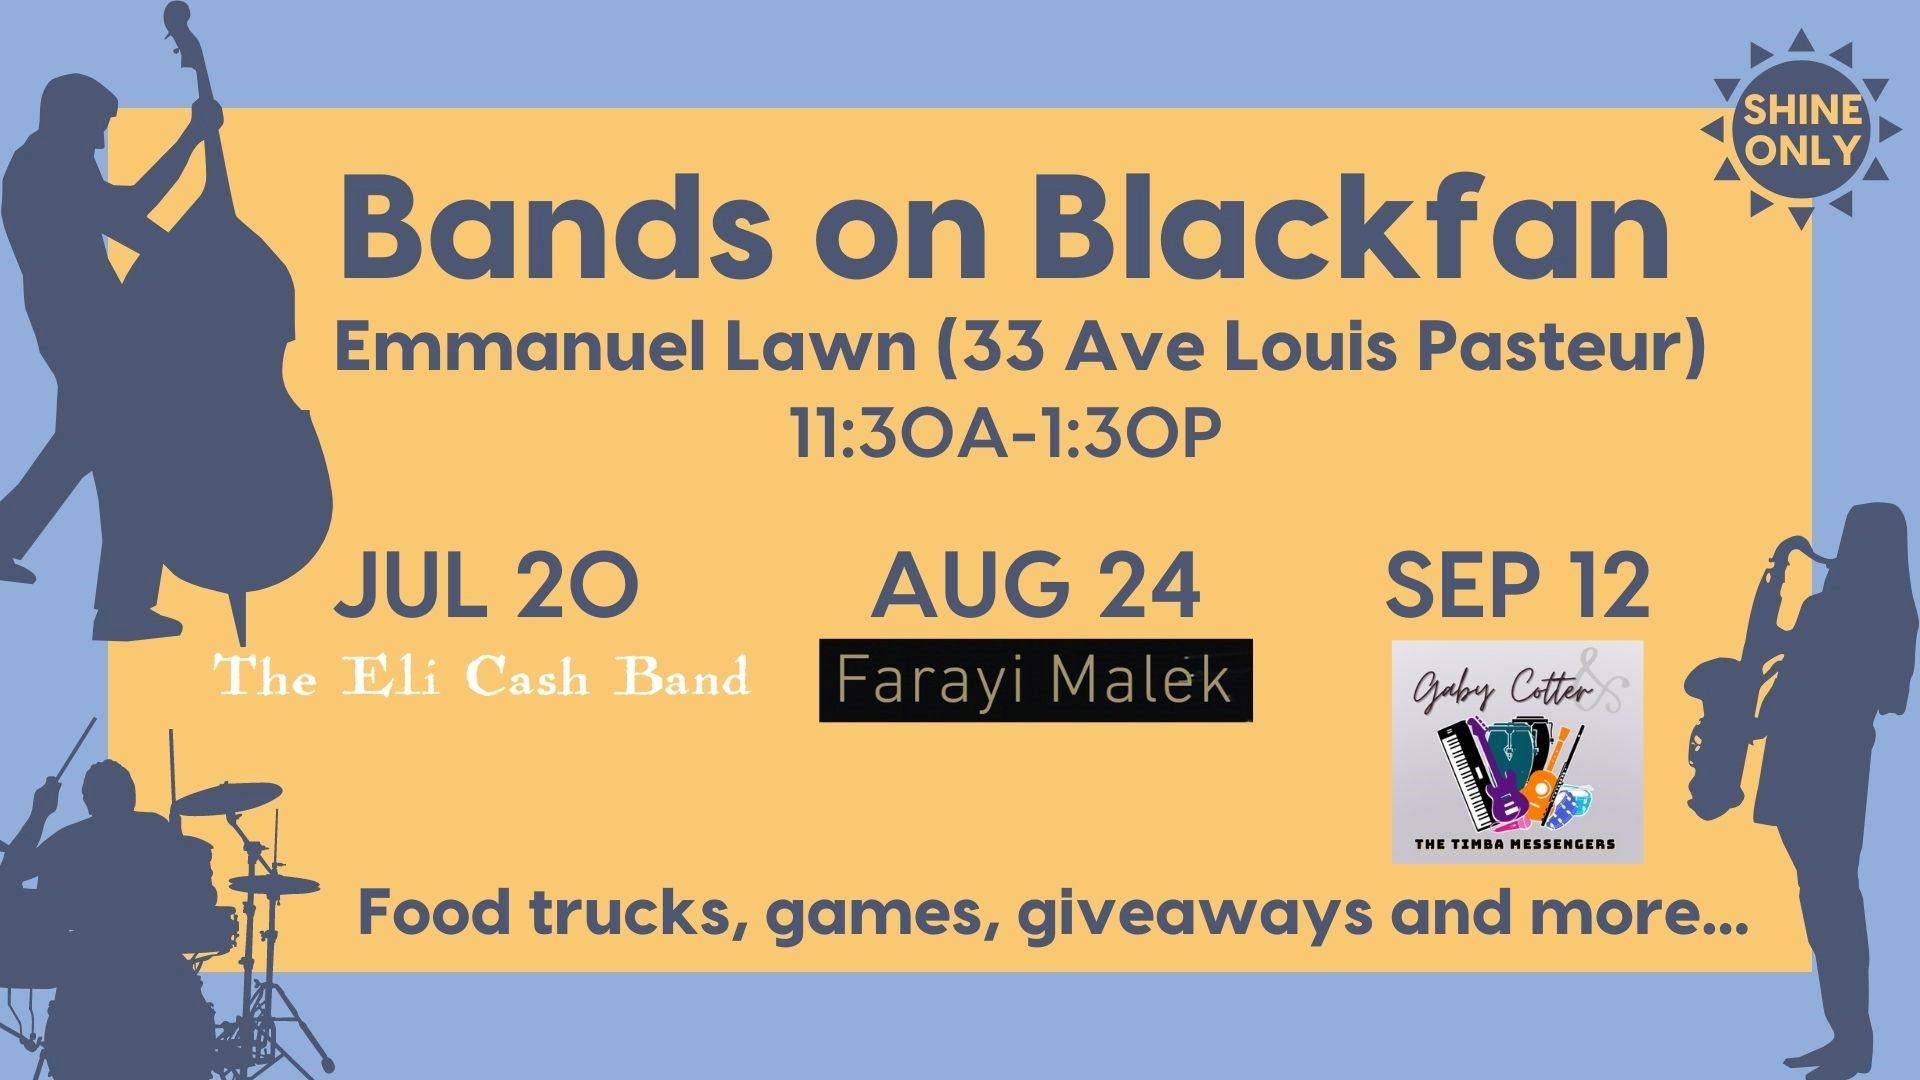 Bands on Blackfan - Emmanuel Lawn (33 Ave Louis Pasteur) 11:30 am - 1:30 pm. July 20 with the Eli Cash Band, August 24 with Farayi Malek, and September 12 with Gaby Cotter and the Timba Messengers. Food trucks, games, giveaways and more...